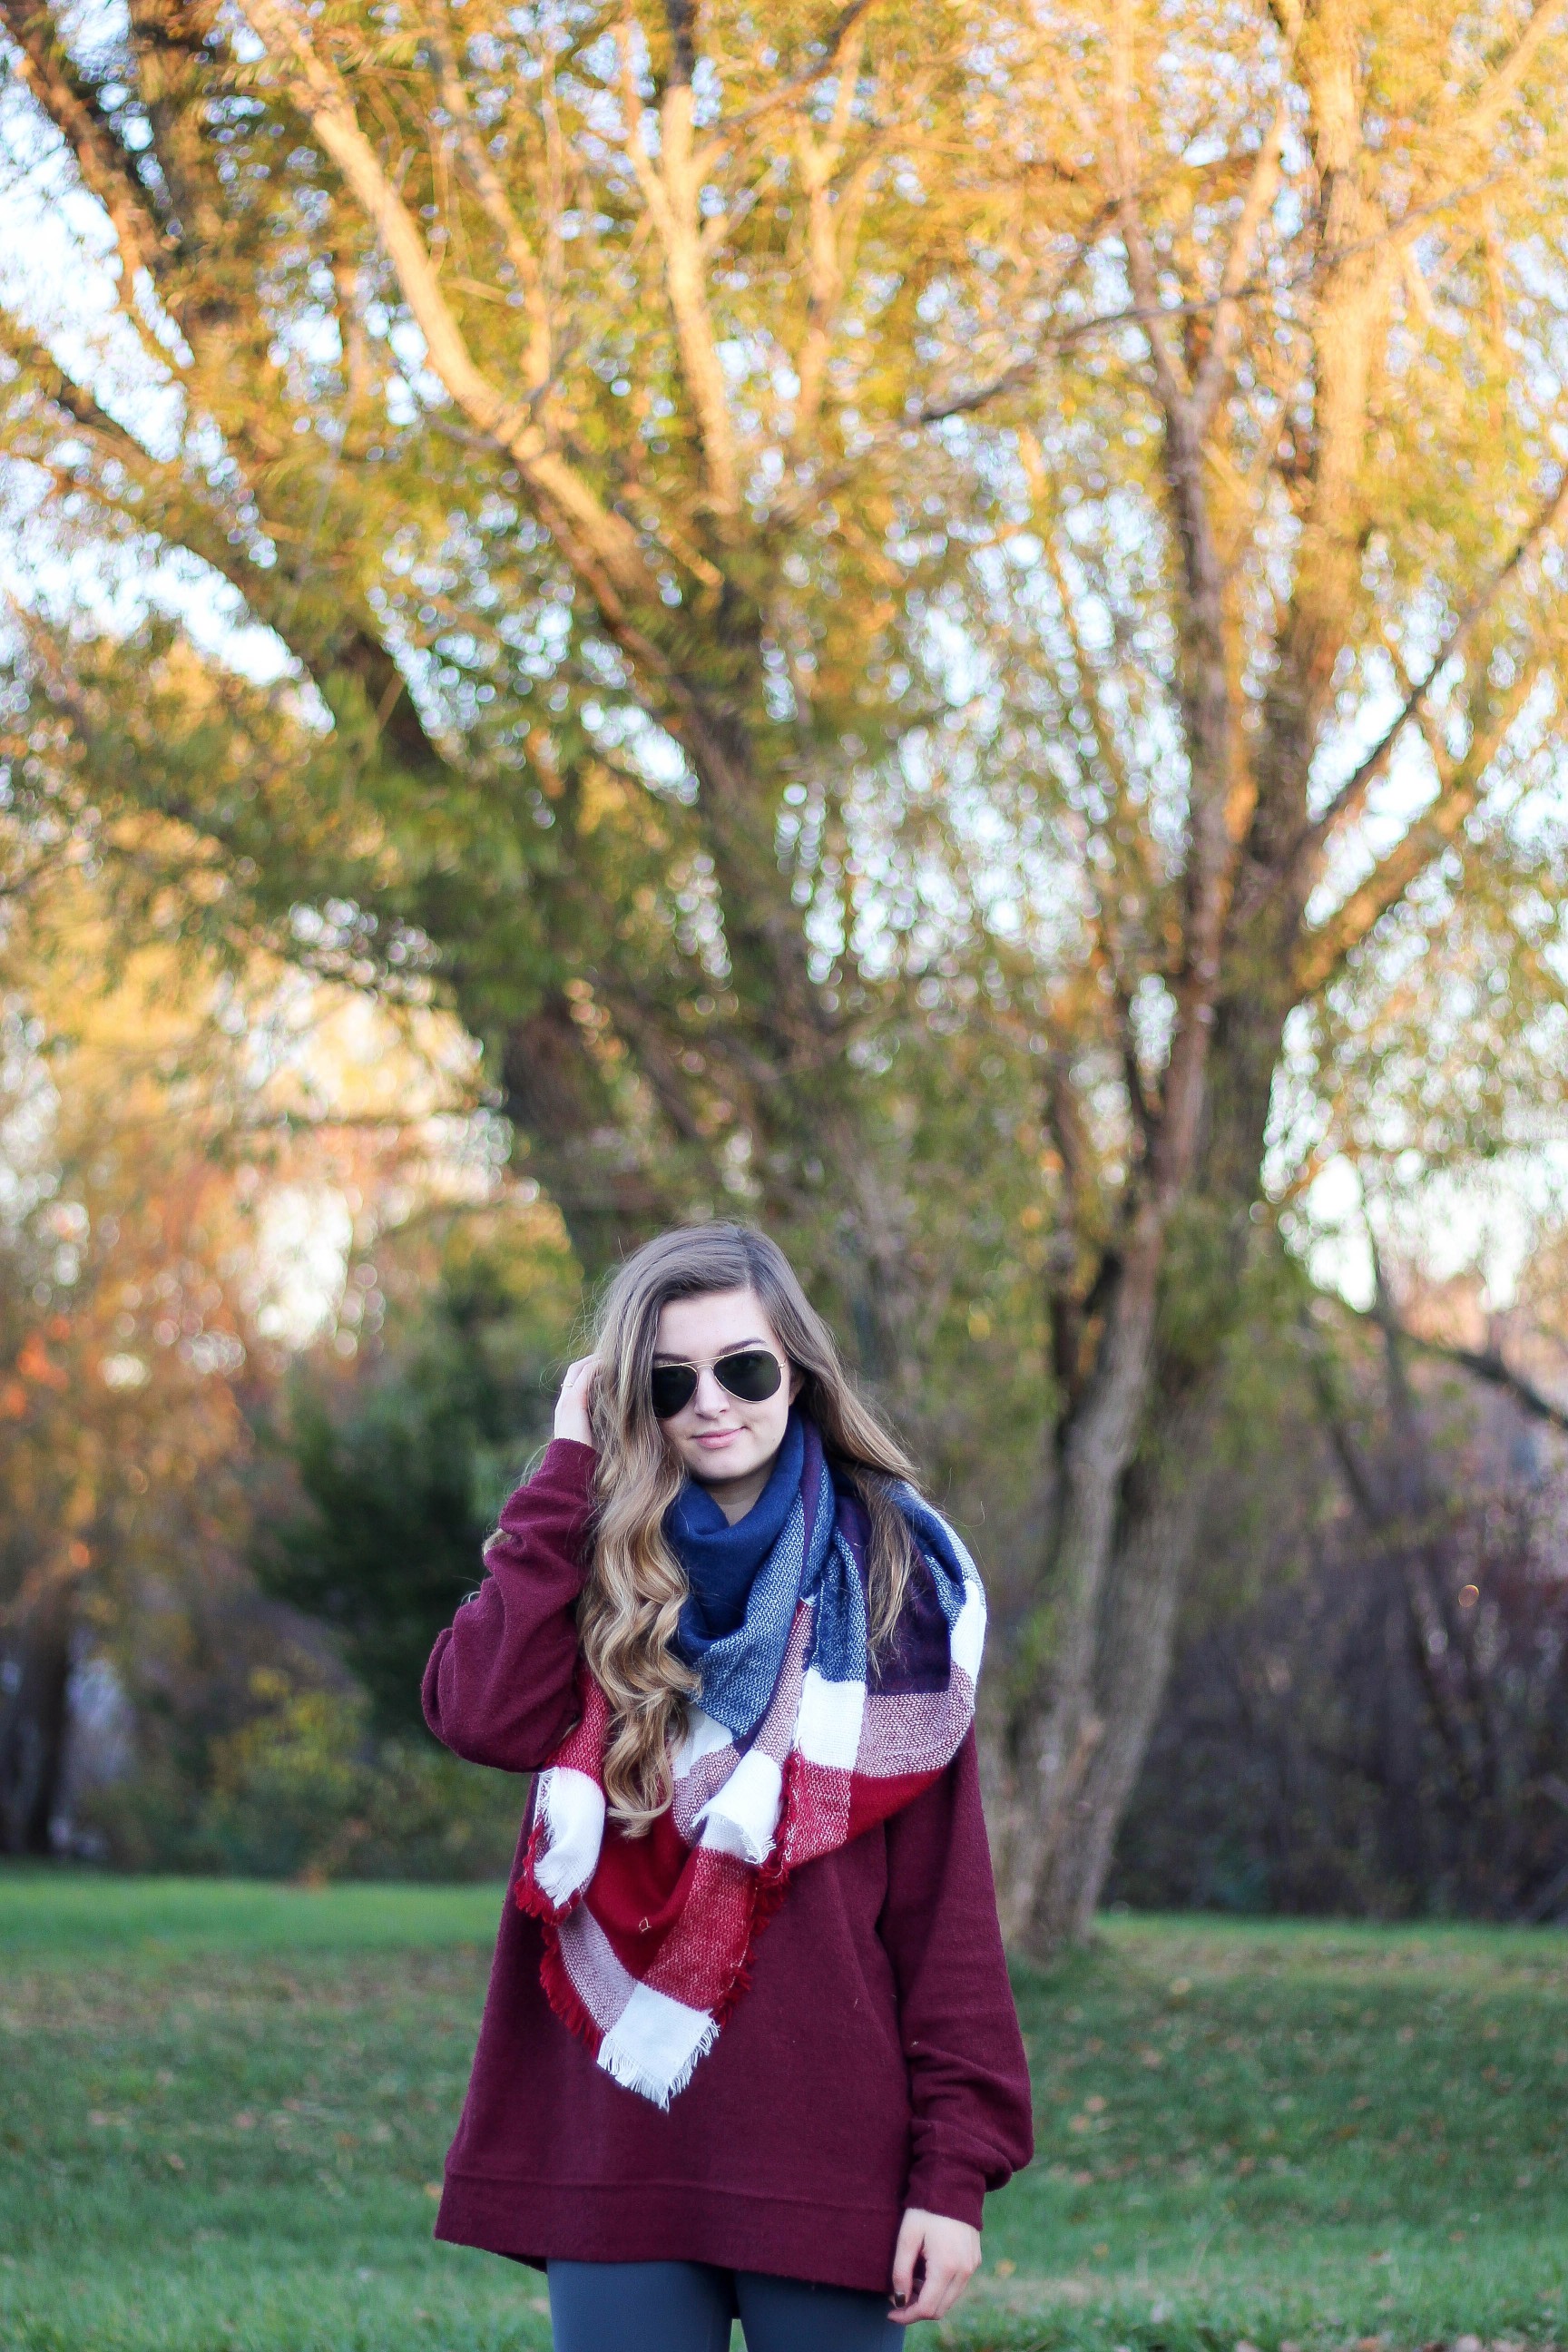 Blanket scarf DISCOUNT CODE and Custom fleece sweatshirt and ll bean duck boots for fall and winter fashion outfit of the day is up on dailydoseofcharm.com daily dose of charm by lauren lindmark